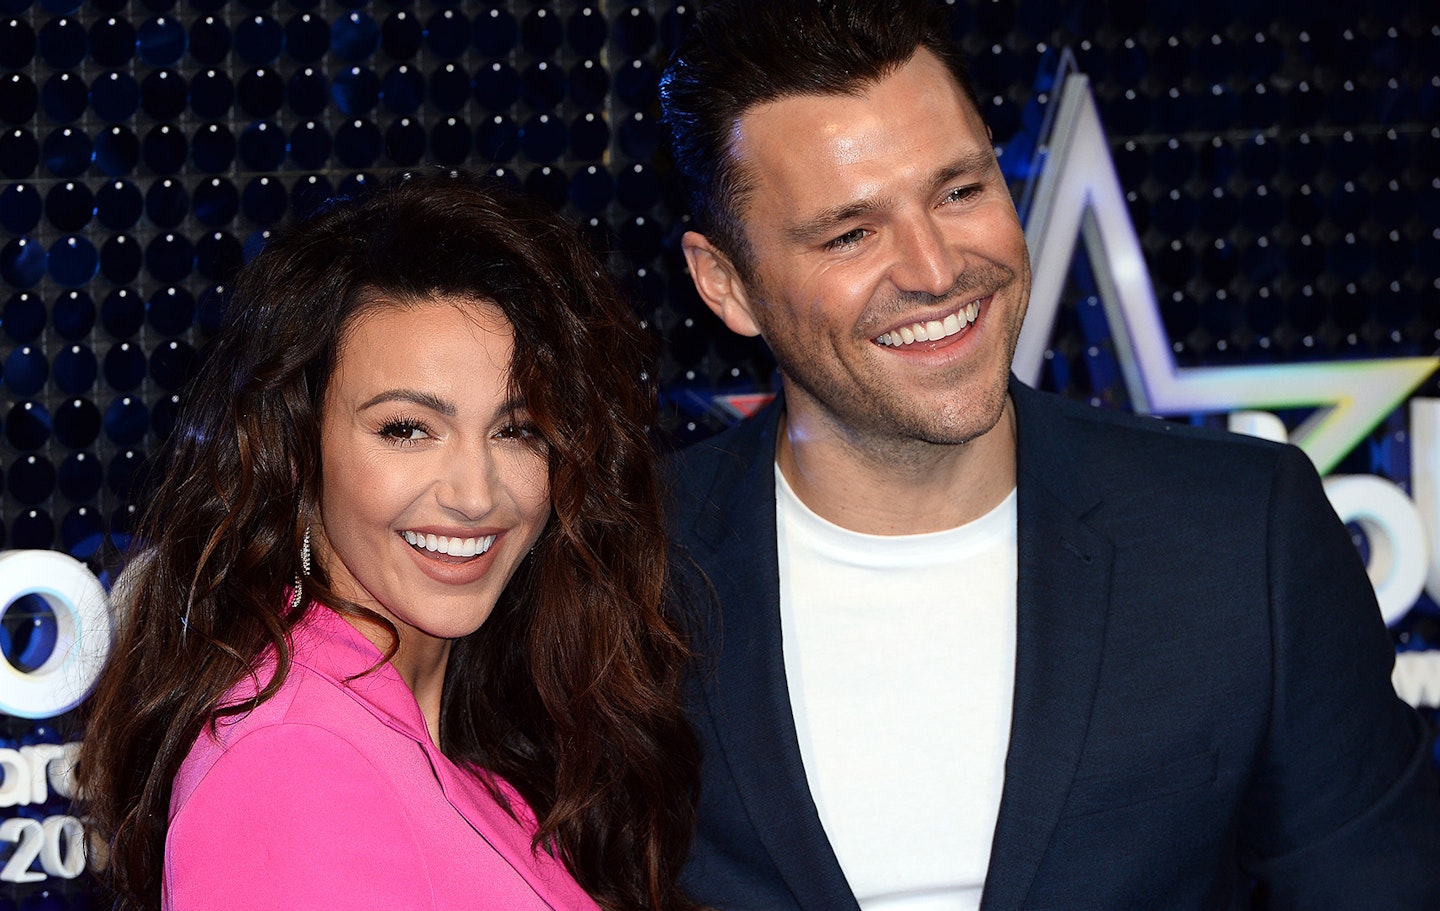 Michelle Keegan and Mark Wright attend The Global Awards 2019 at Eventim Apollo